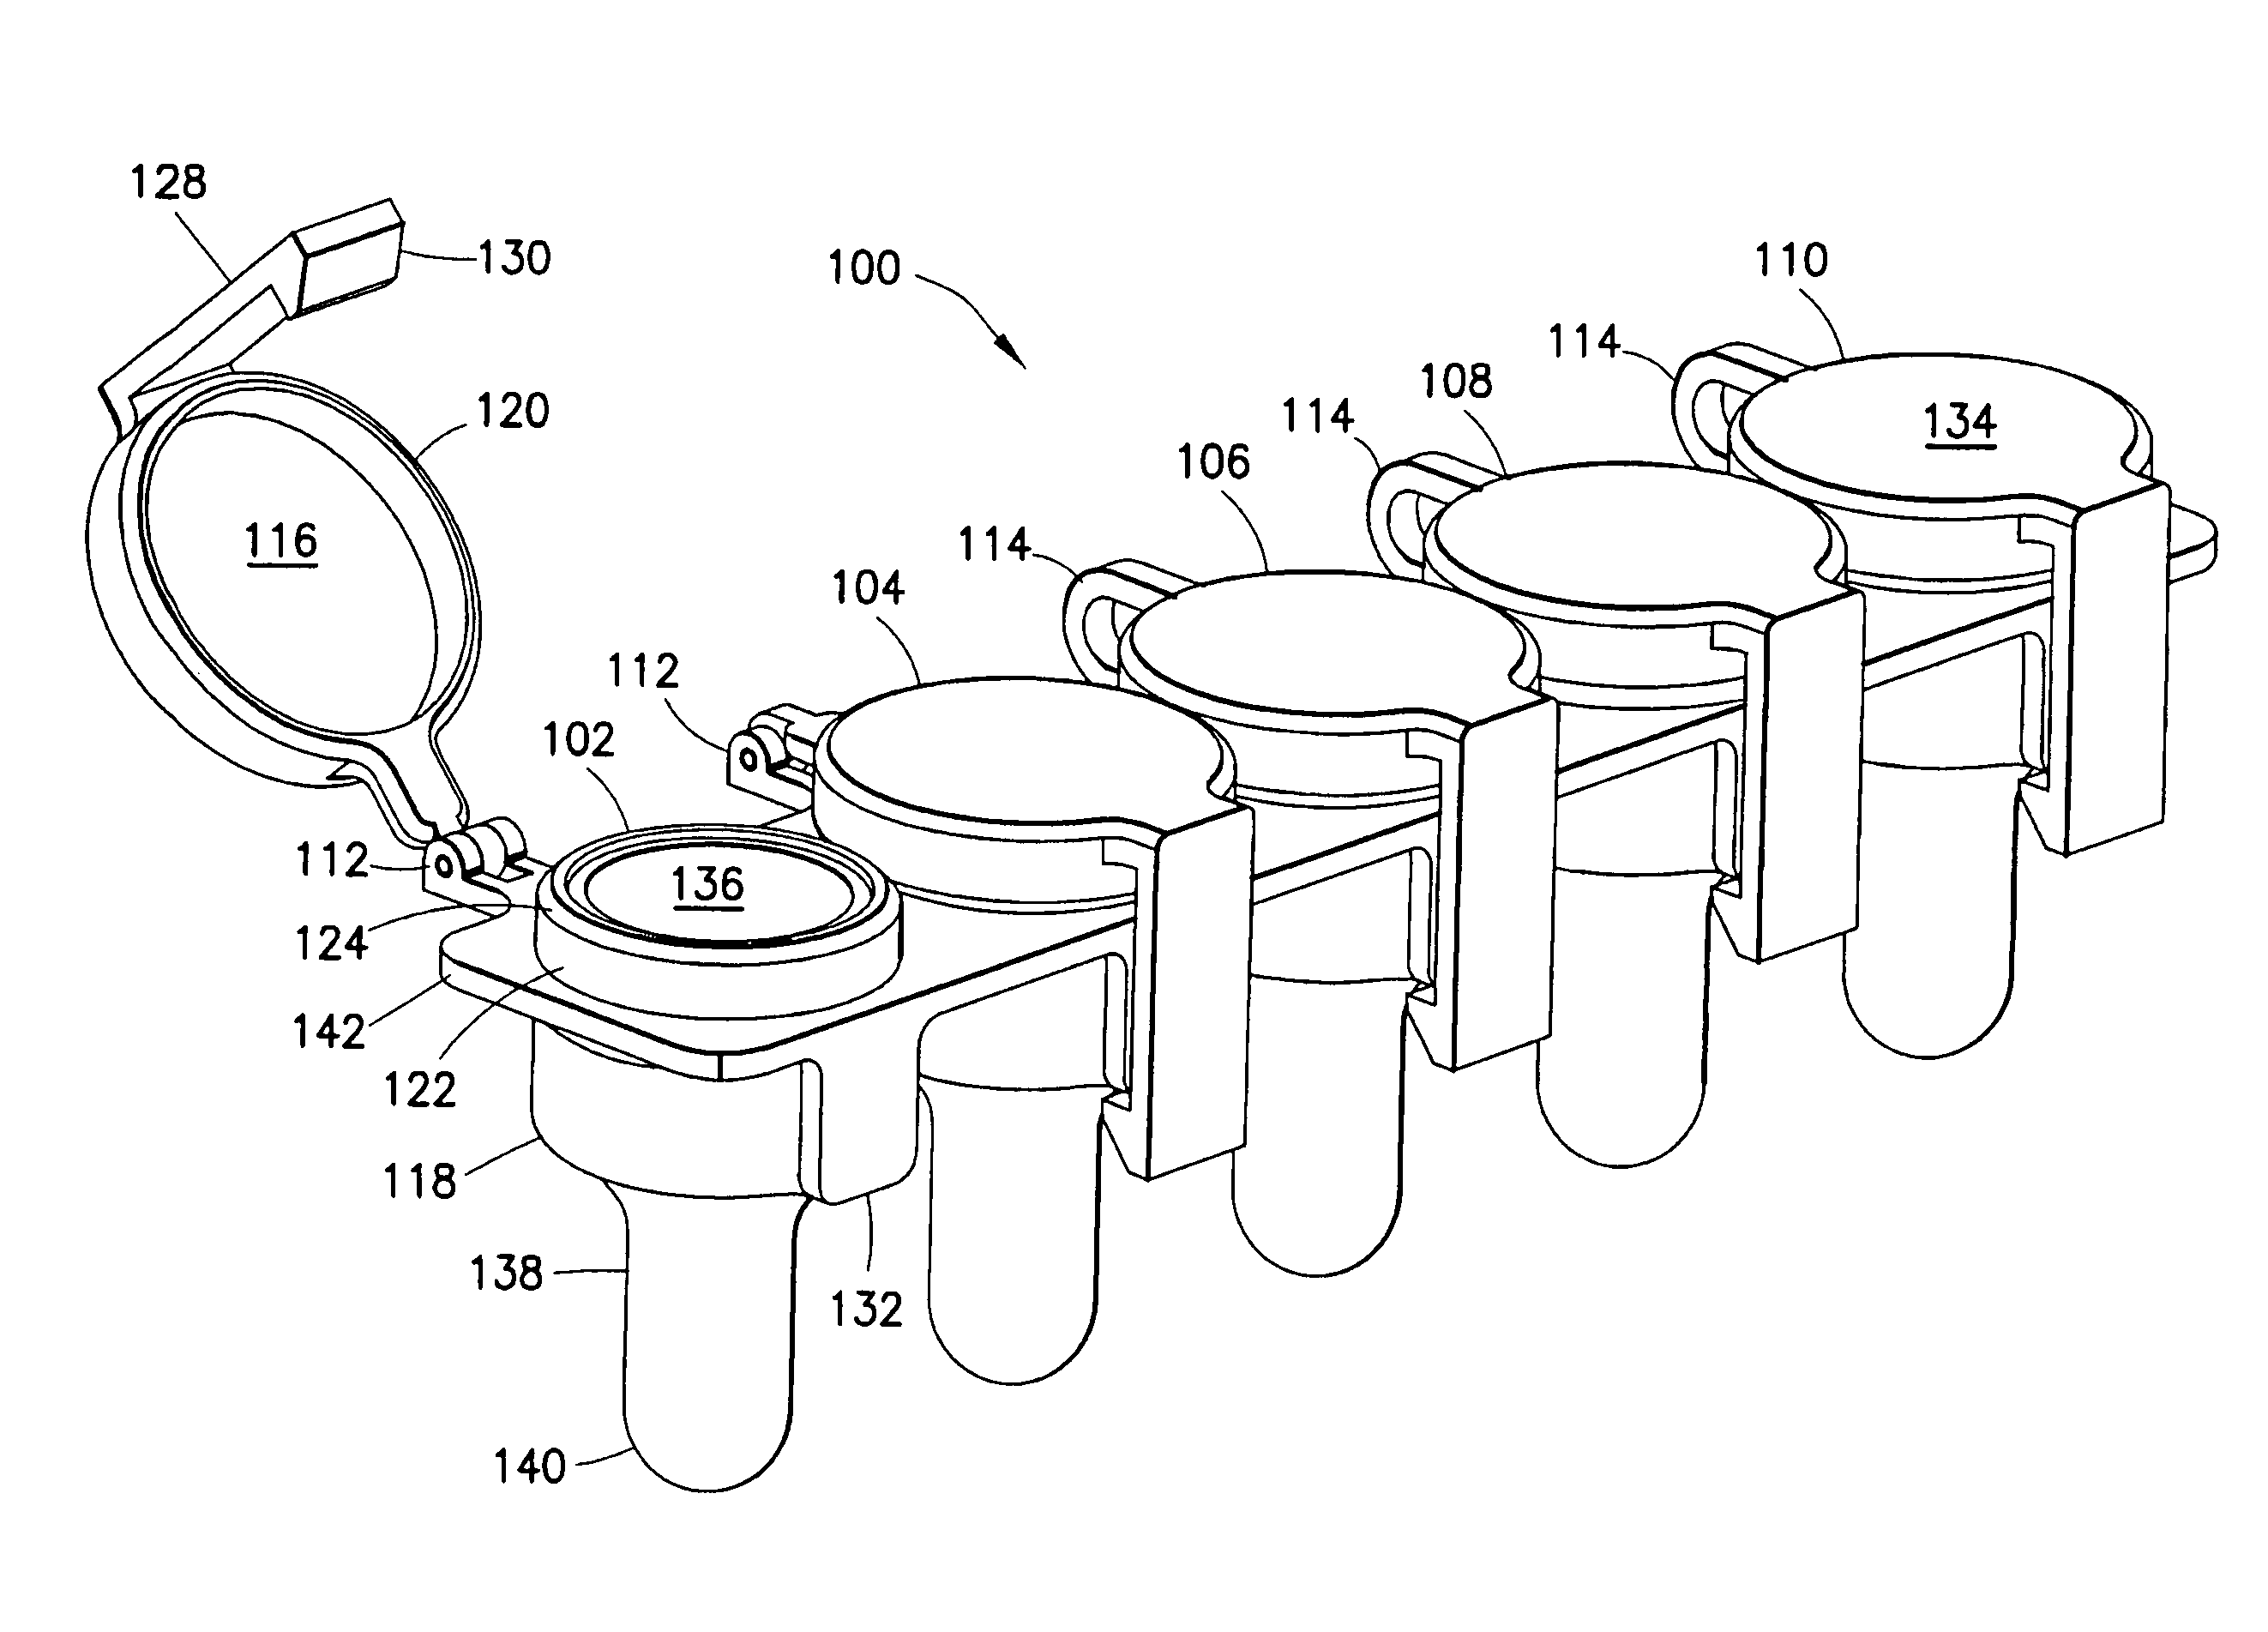 Living hinge needle assembly for medicament delivery device